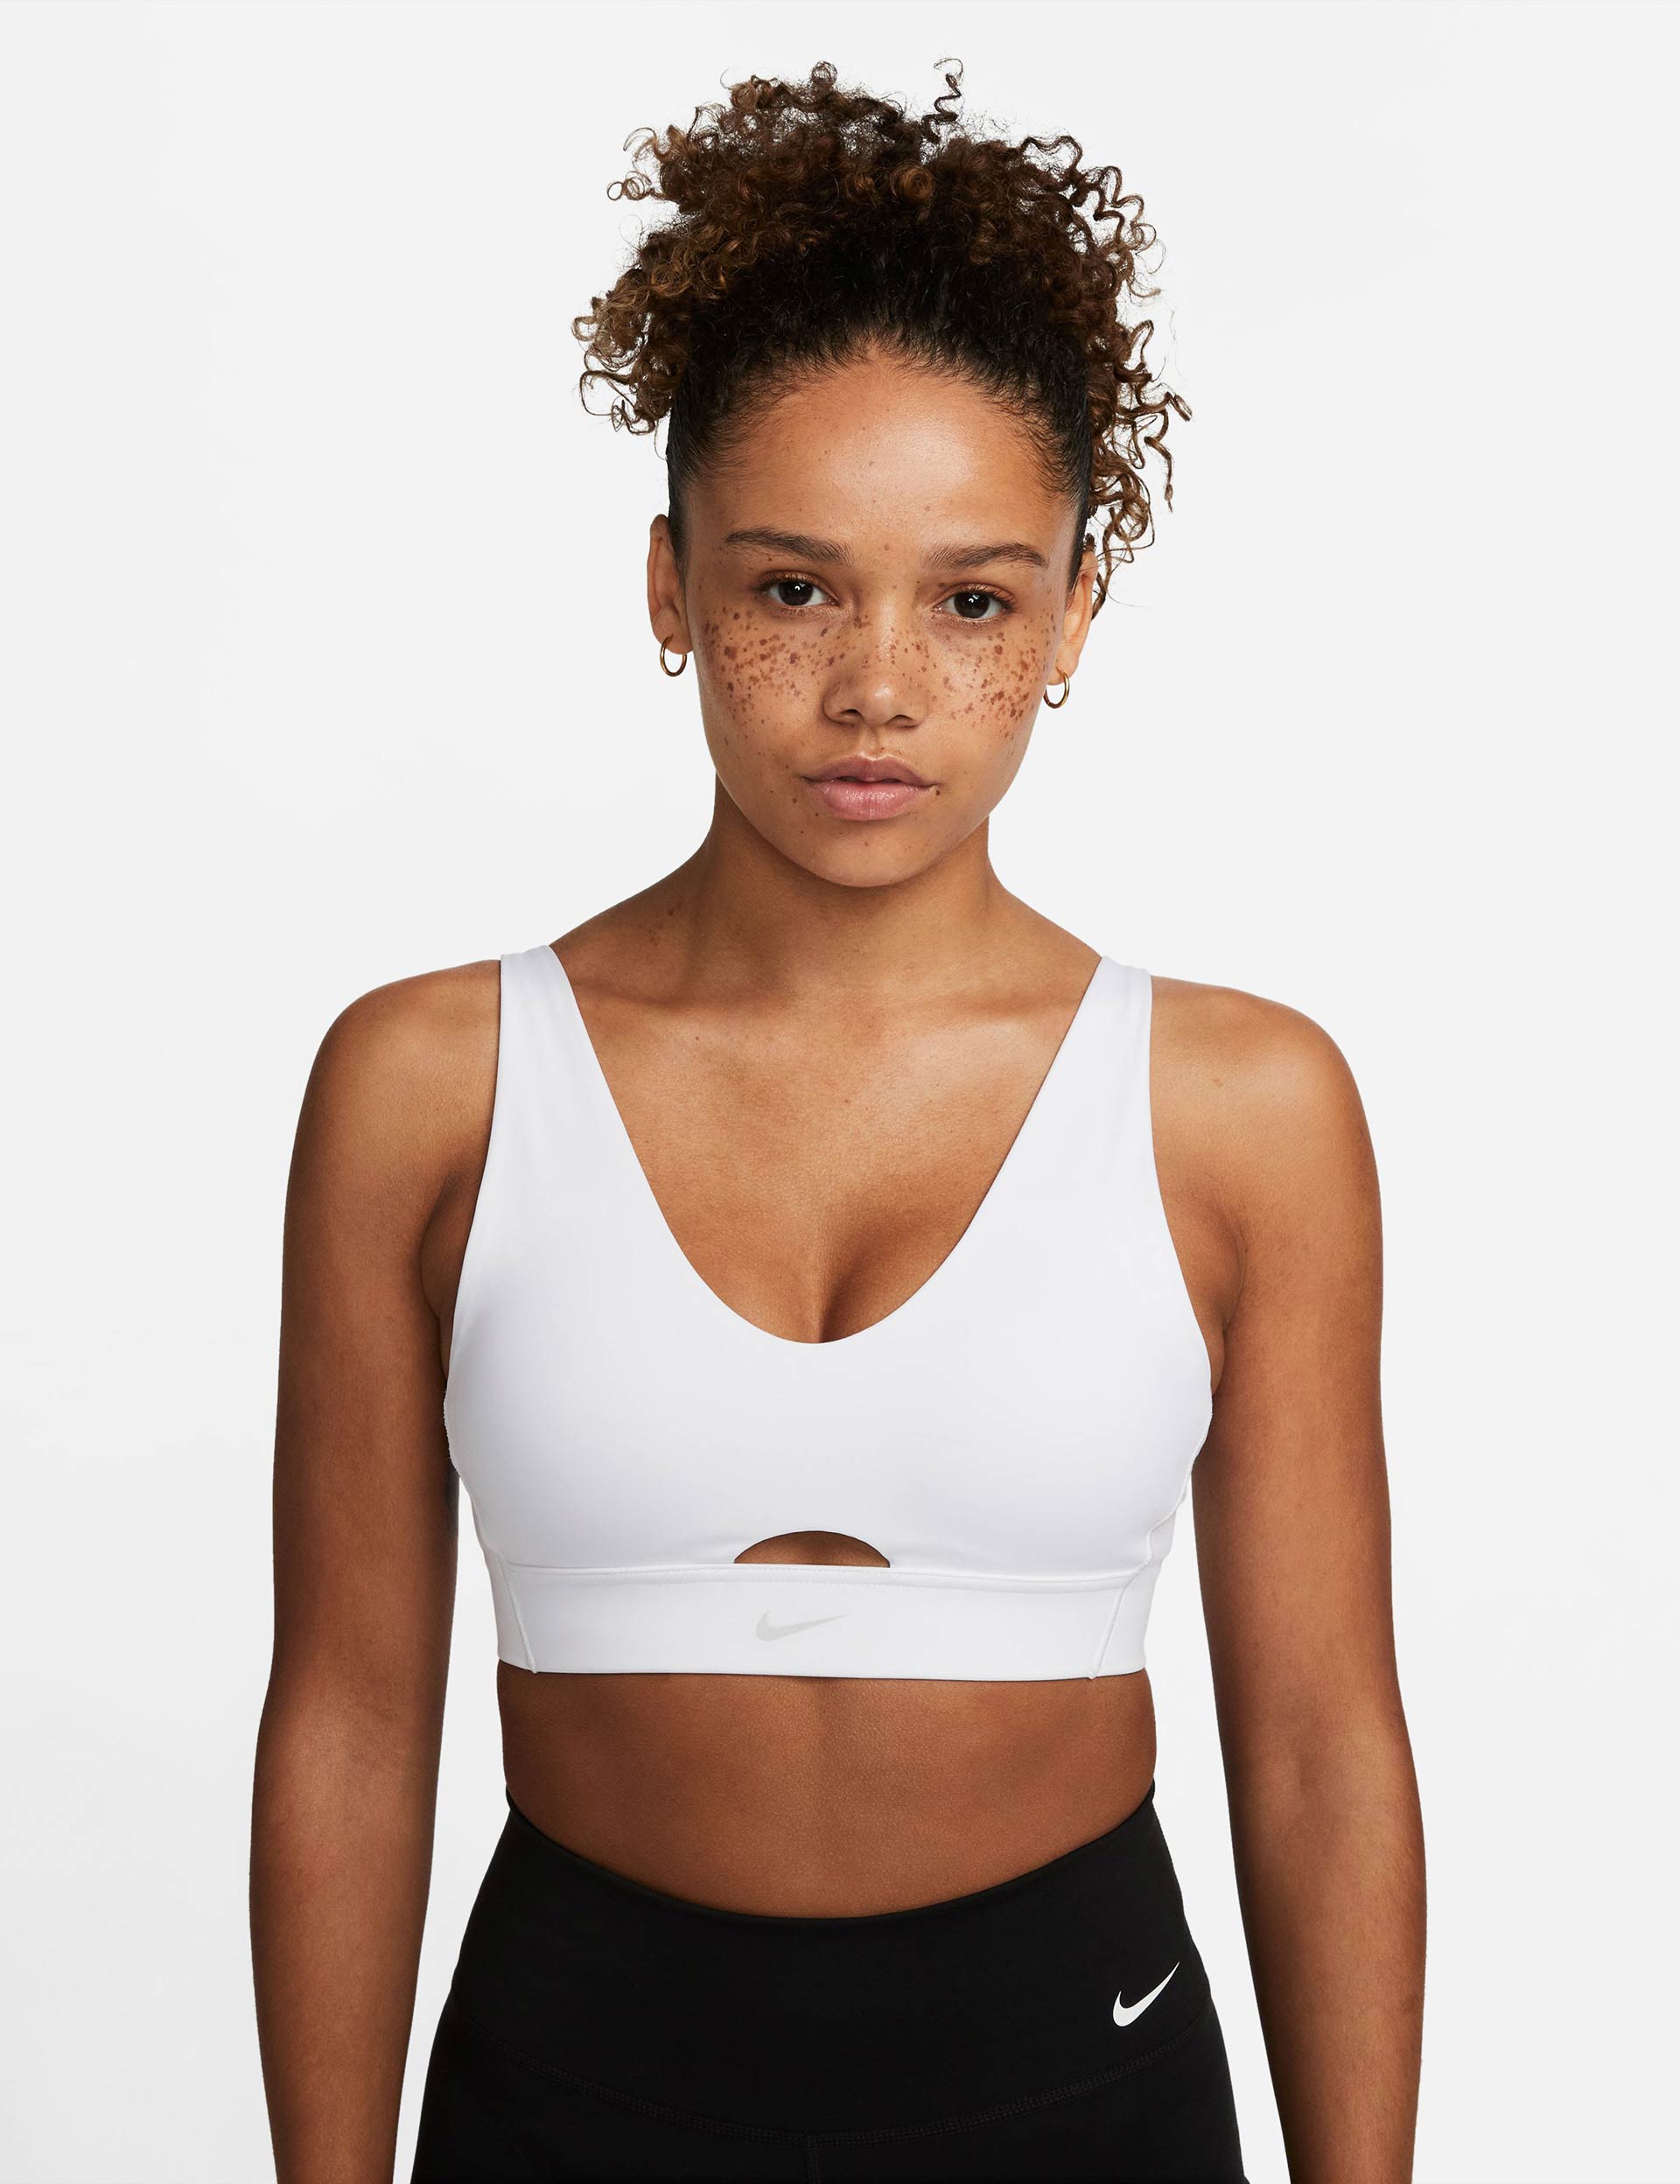 Nike Yoga Dri-FIT Indy Bra in pink for women - Buy online! - HERE